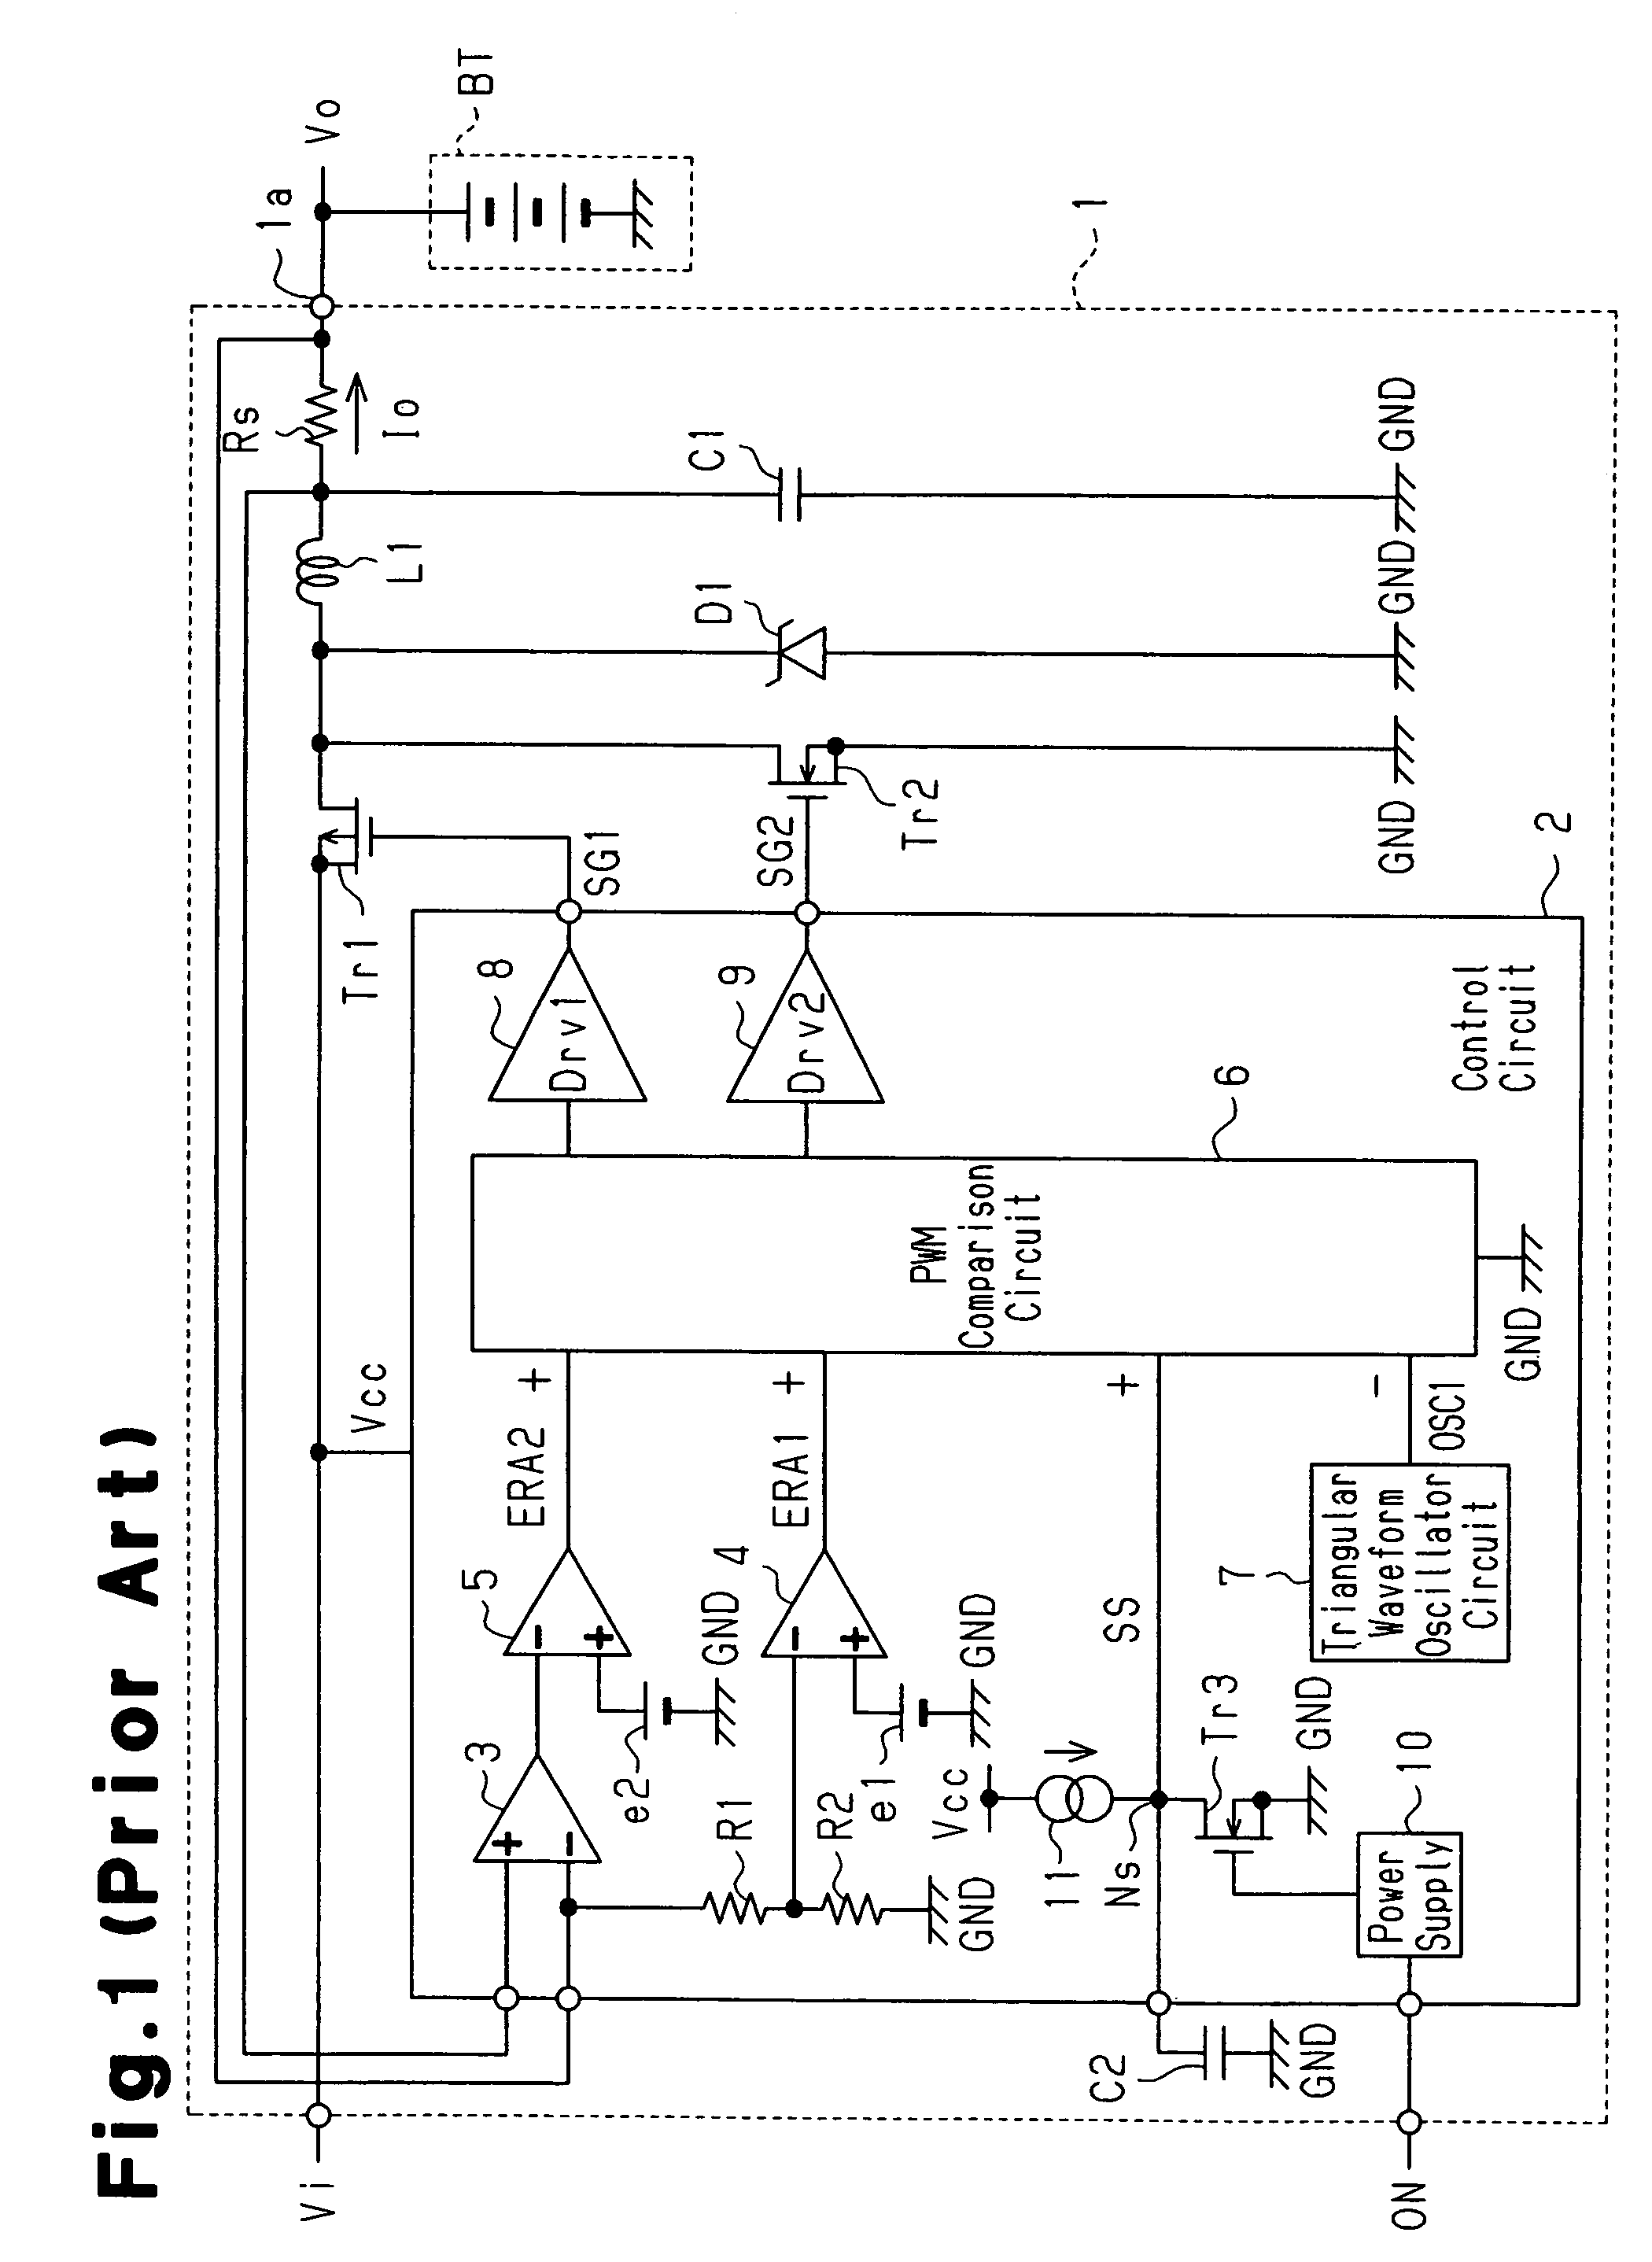 Circuit and method for controlling DC-DC converter